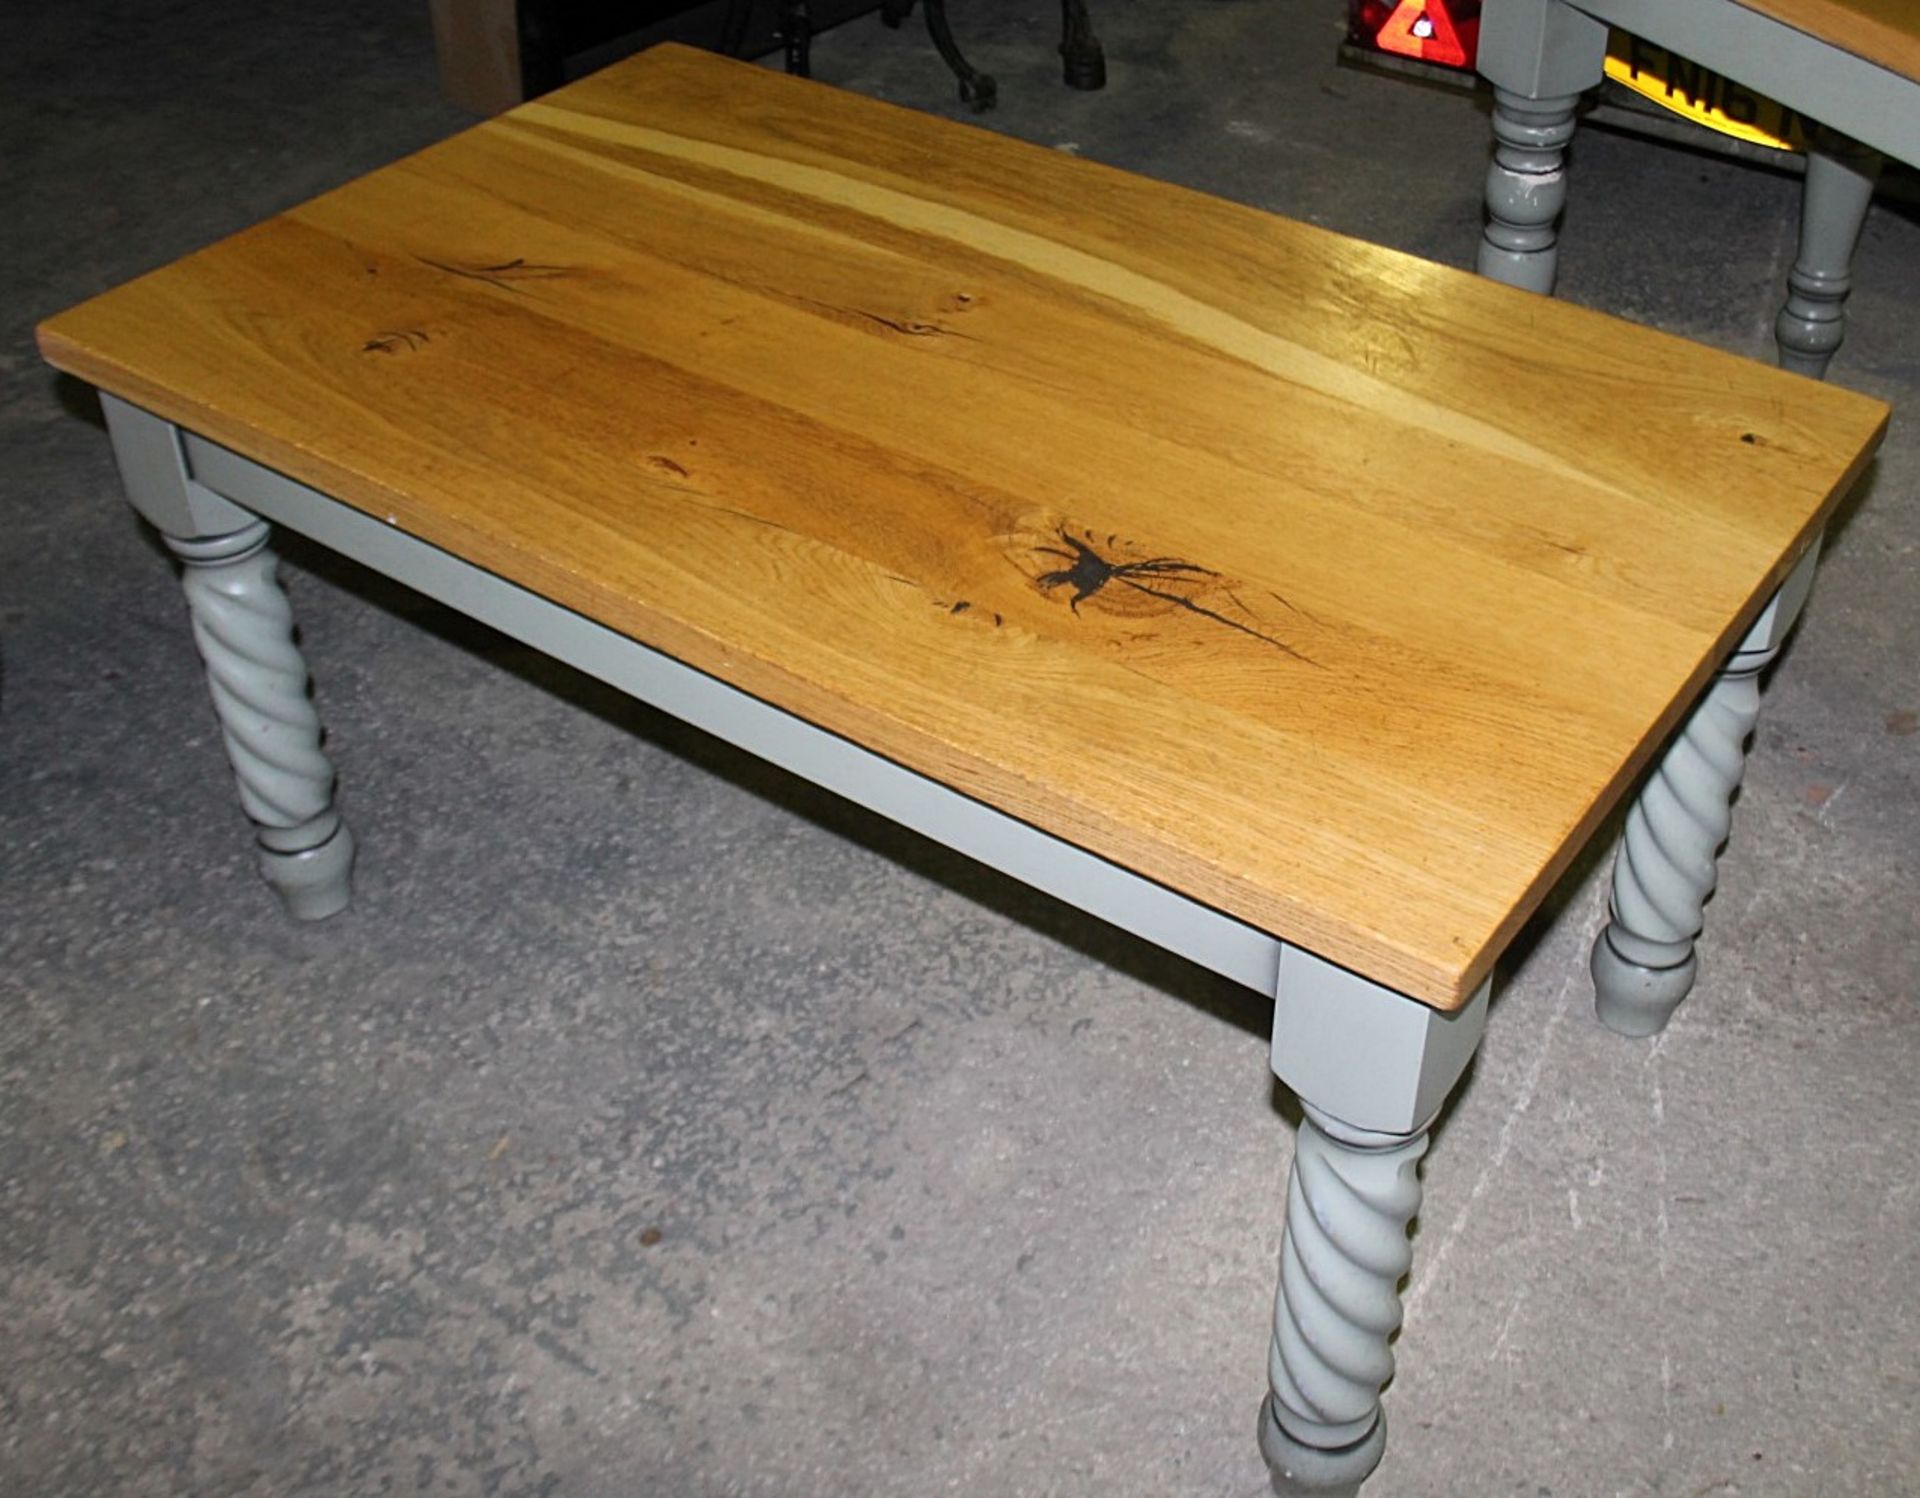 1 x Solid Wood Farmhouse Low Coffee Table - Features A Solid Oak Table Top - Image 3 of 4